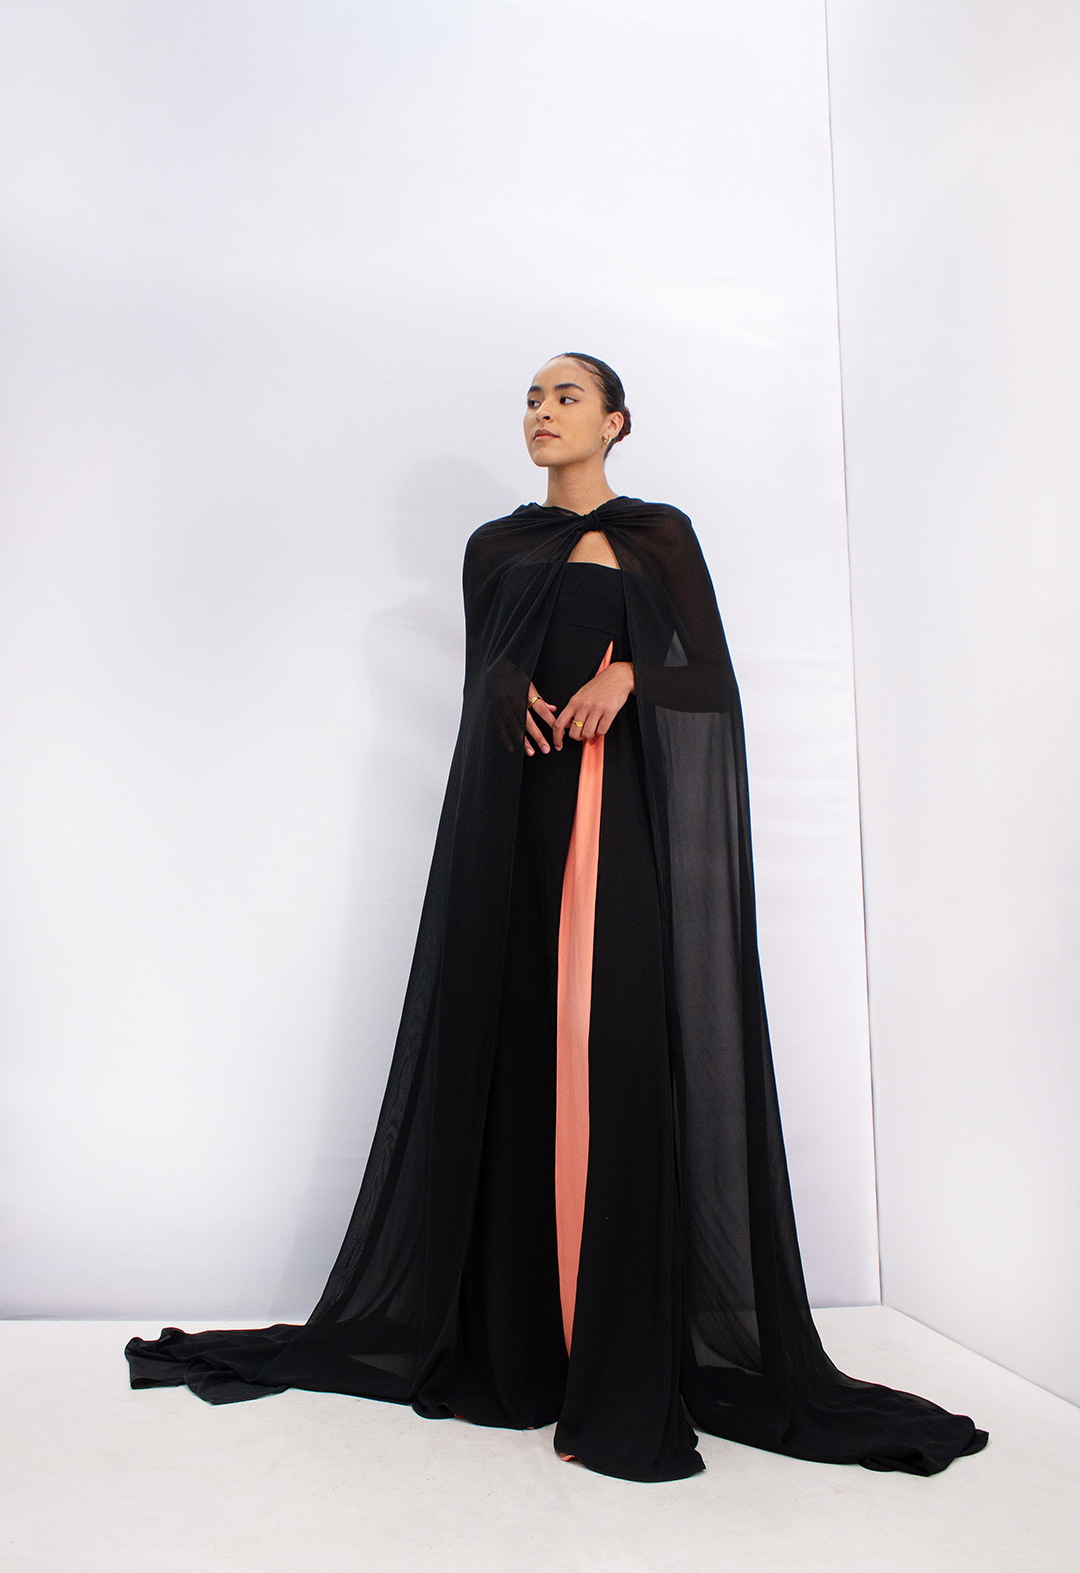 The front view of the dress with a cape. This black georgette dress has a front slit that has a coral charmeuse skirt underneath. The black chiffon cape has a knot on the left side of the wearer’s neck that drapes toward the back of the cape.